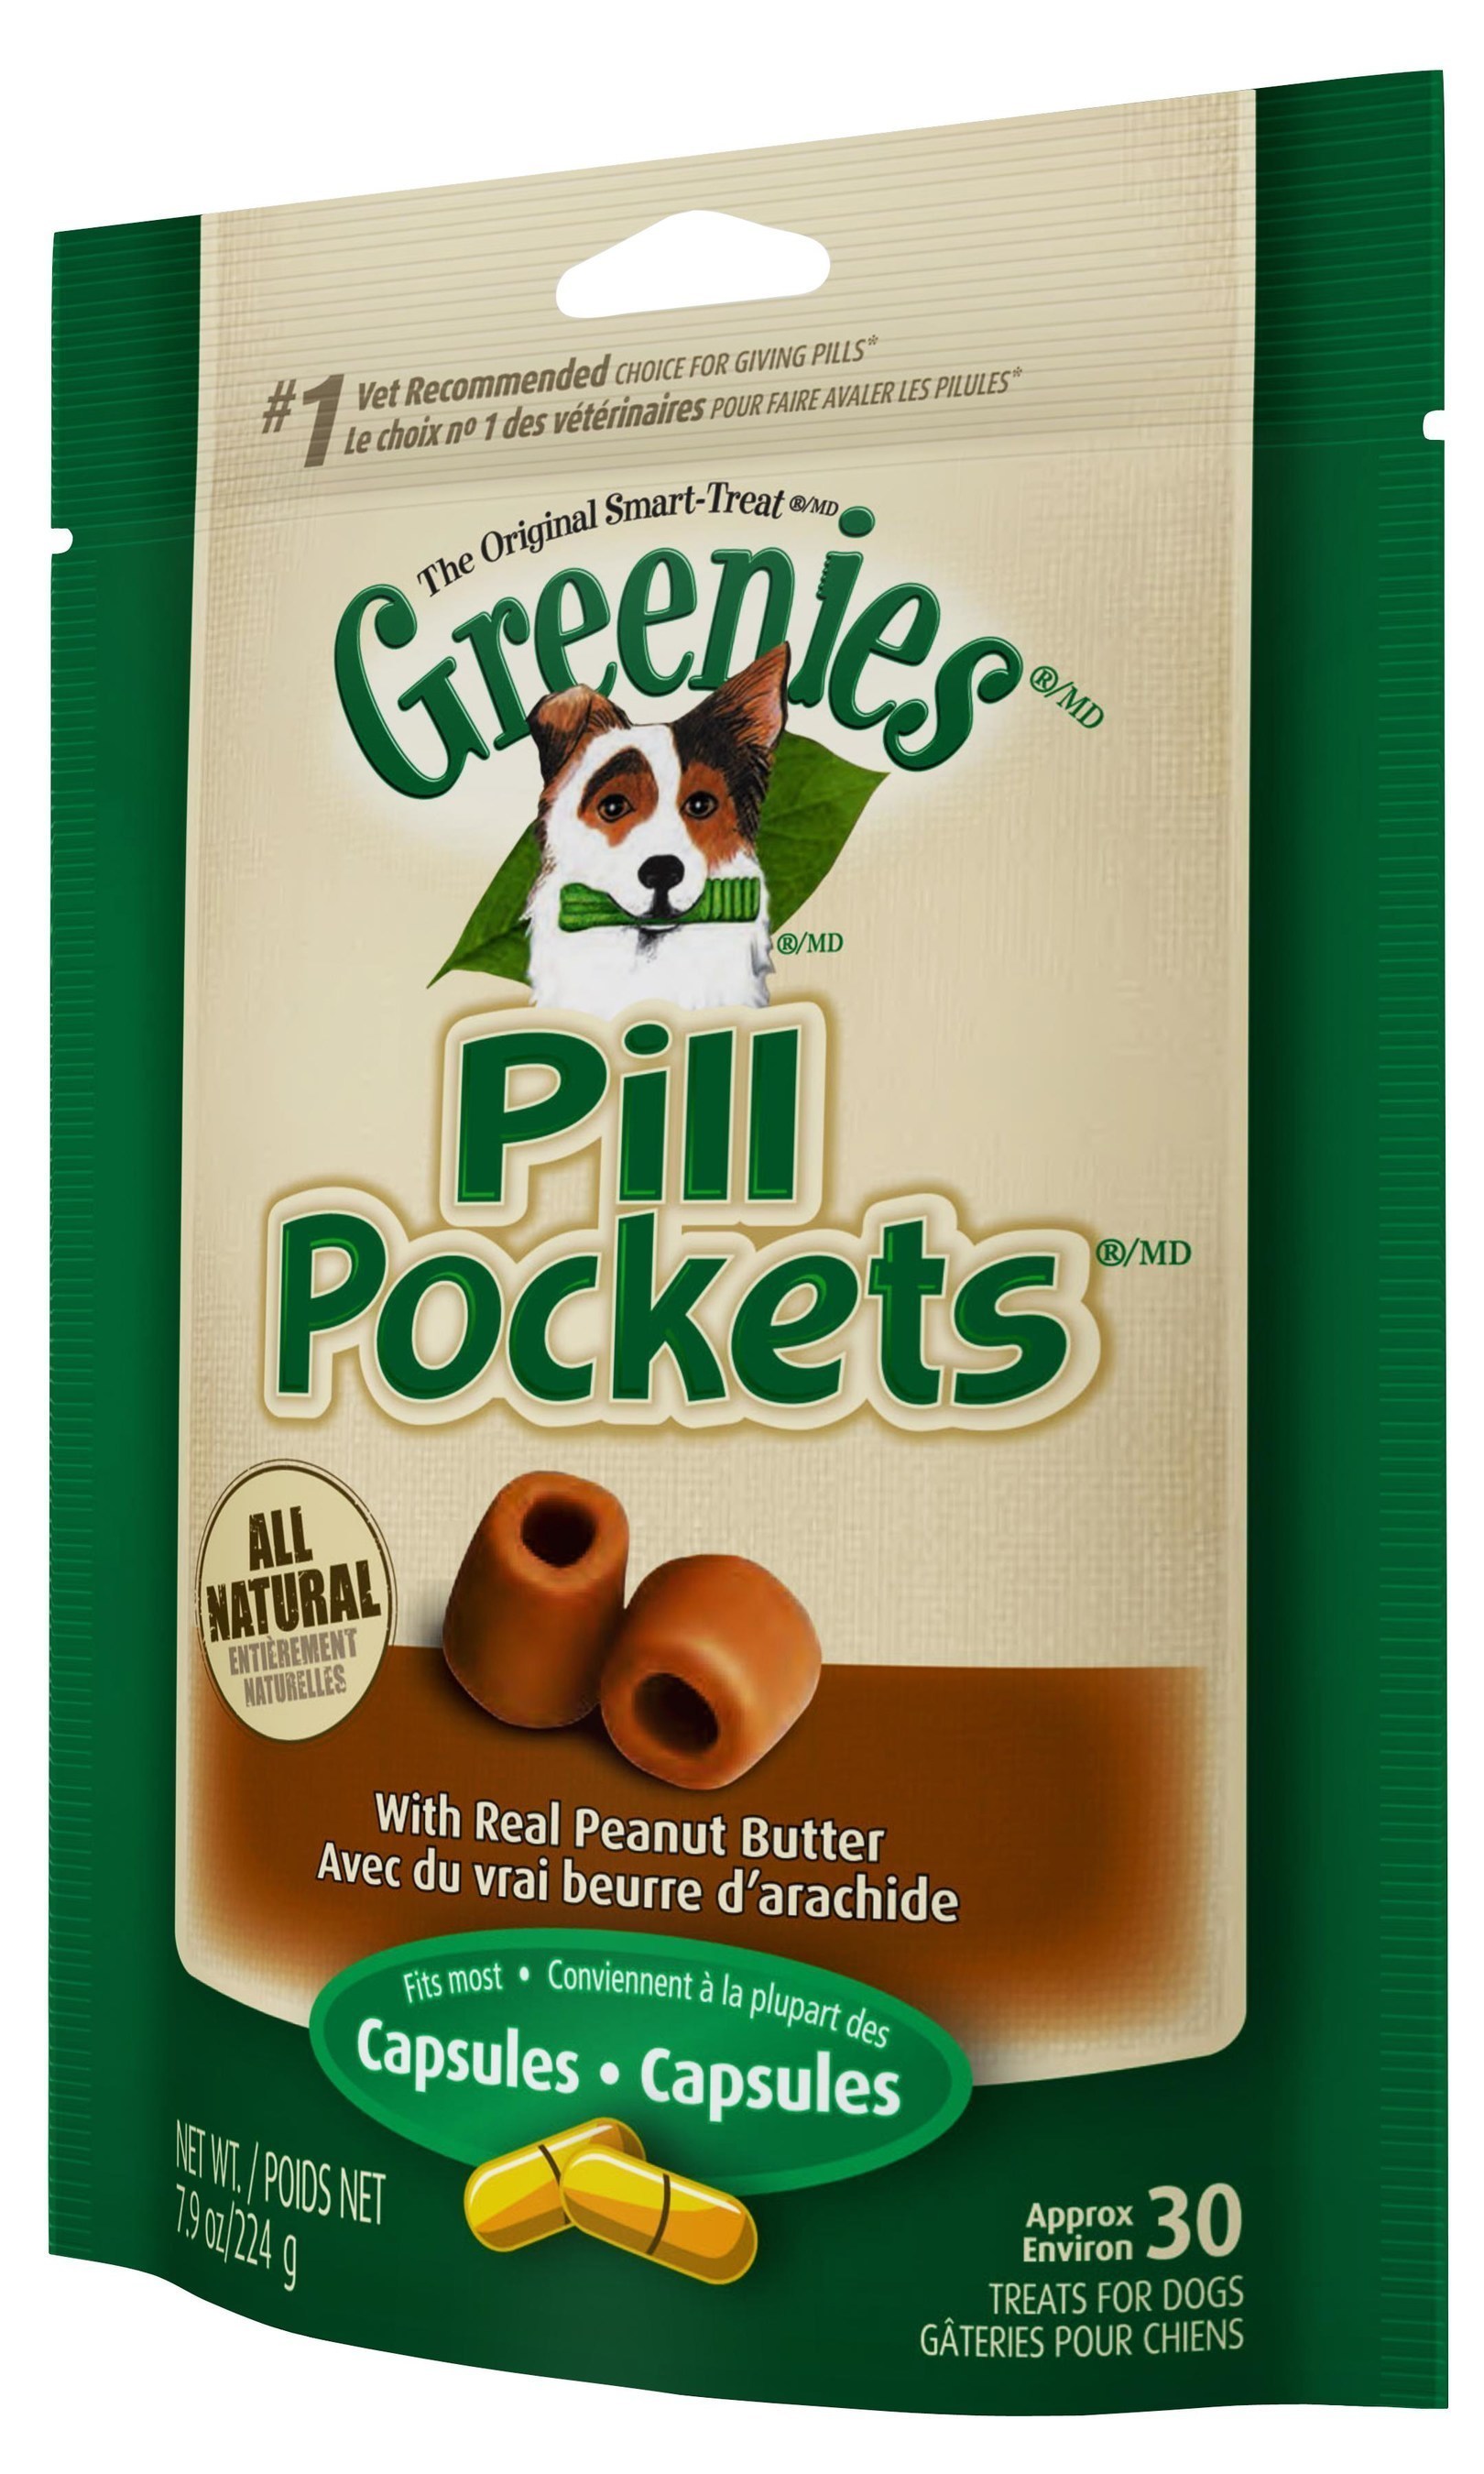 GREENIES(TM) PILL POCKETS(TM) Treats Help Take the Stress and Frustration Out of Giving Pets Medication